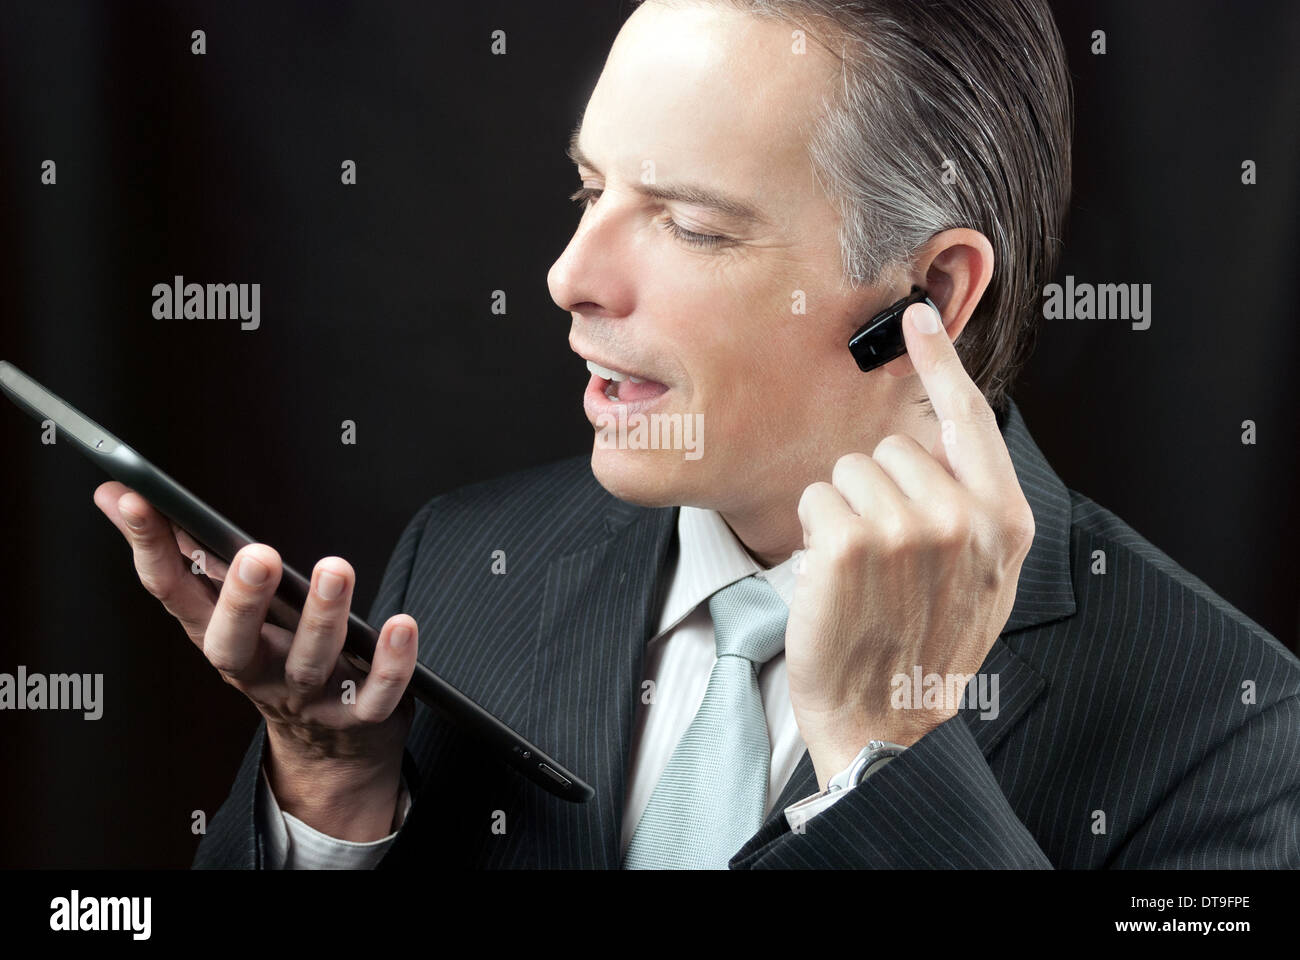 Close-up of a businessman using a tablet adjusting his earpiece headset. Stock Photo